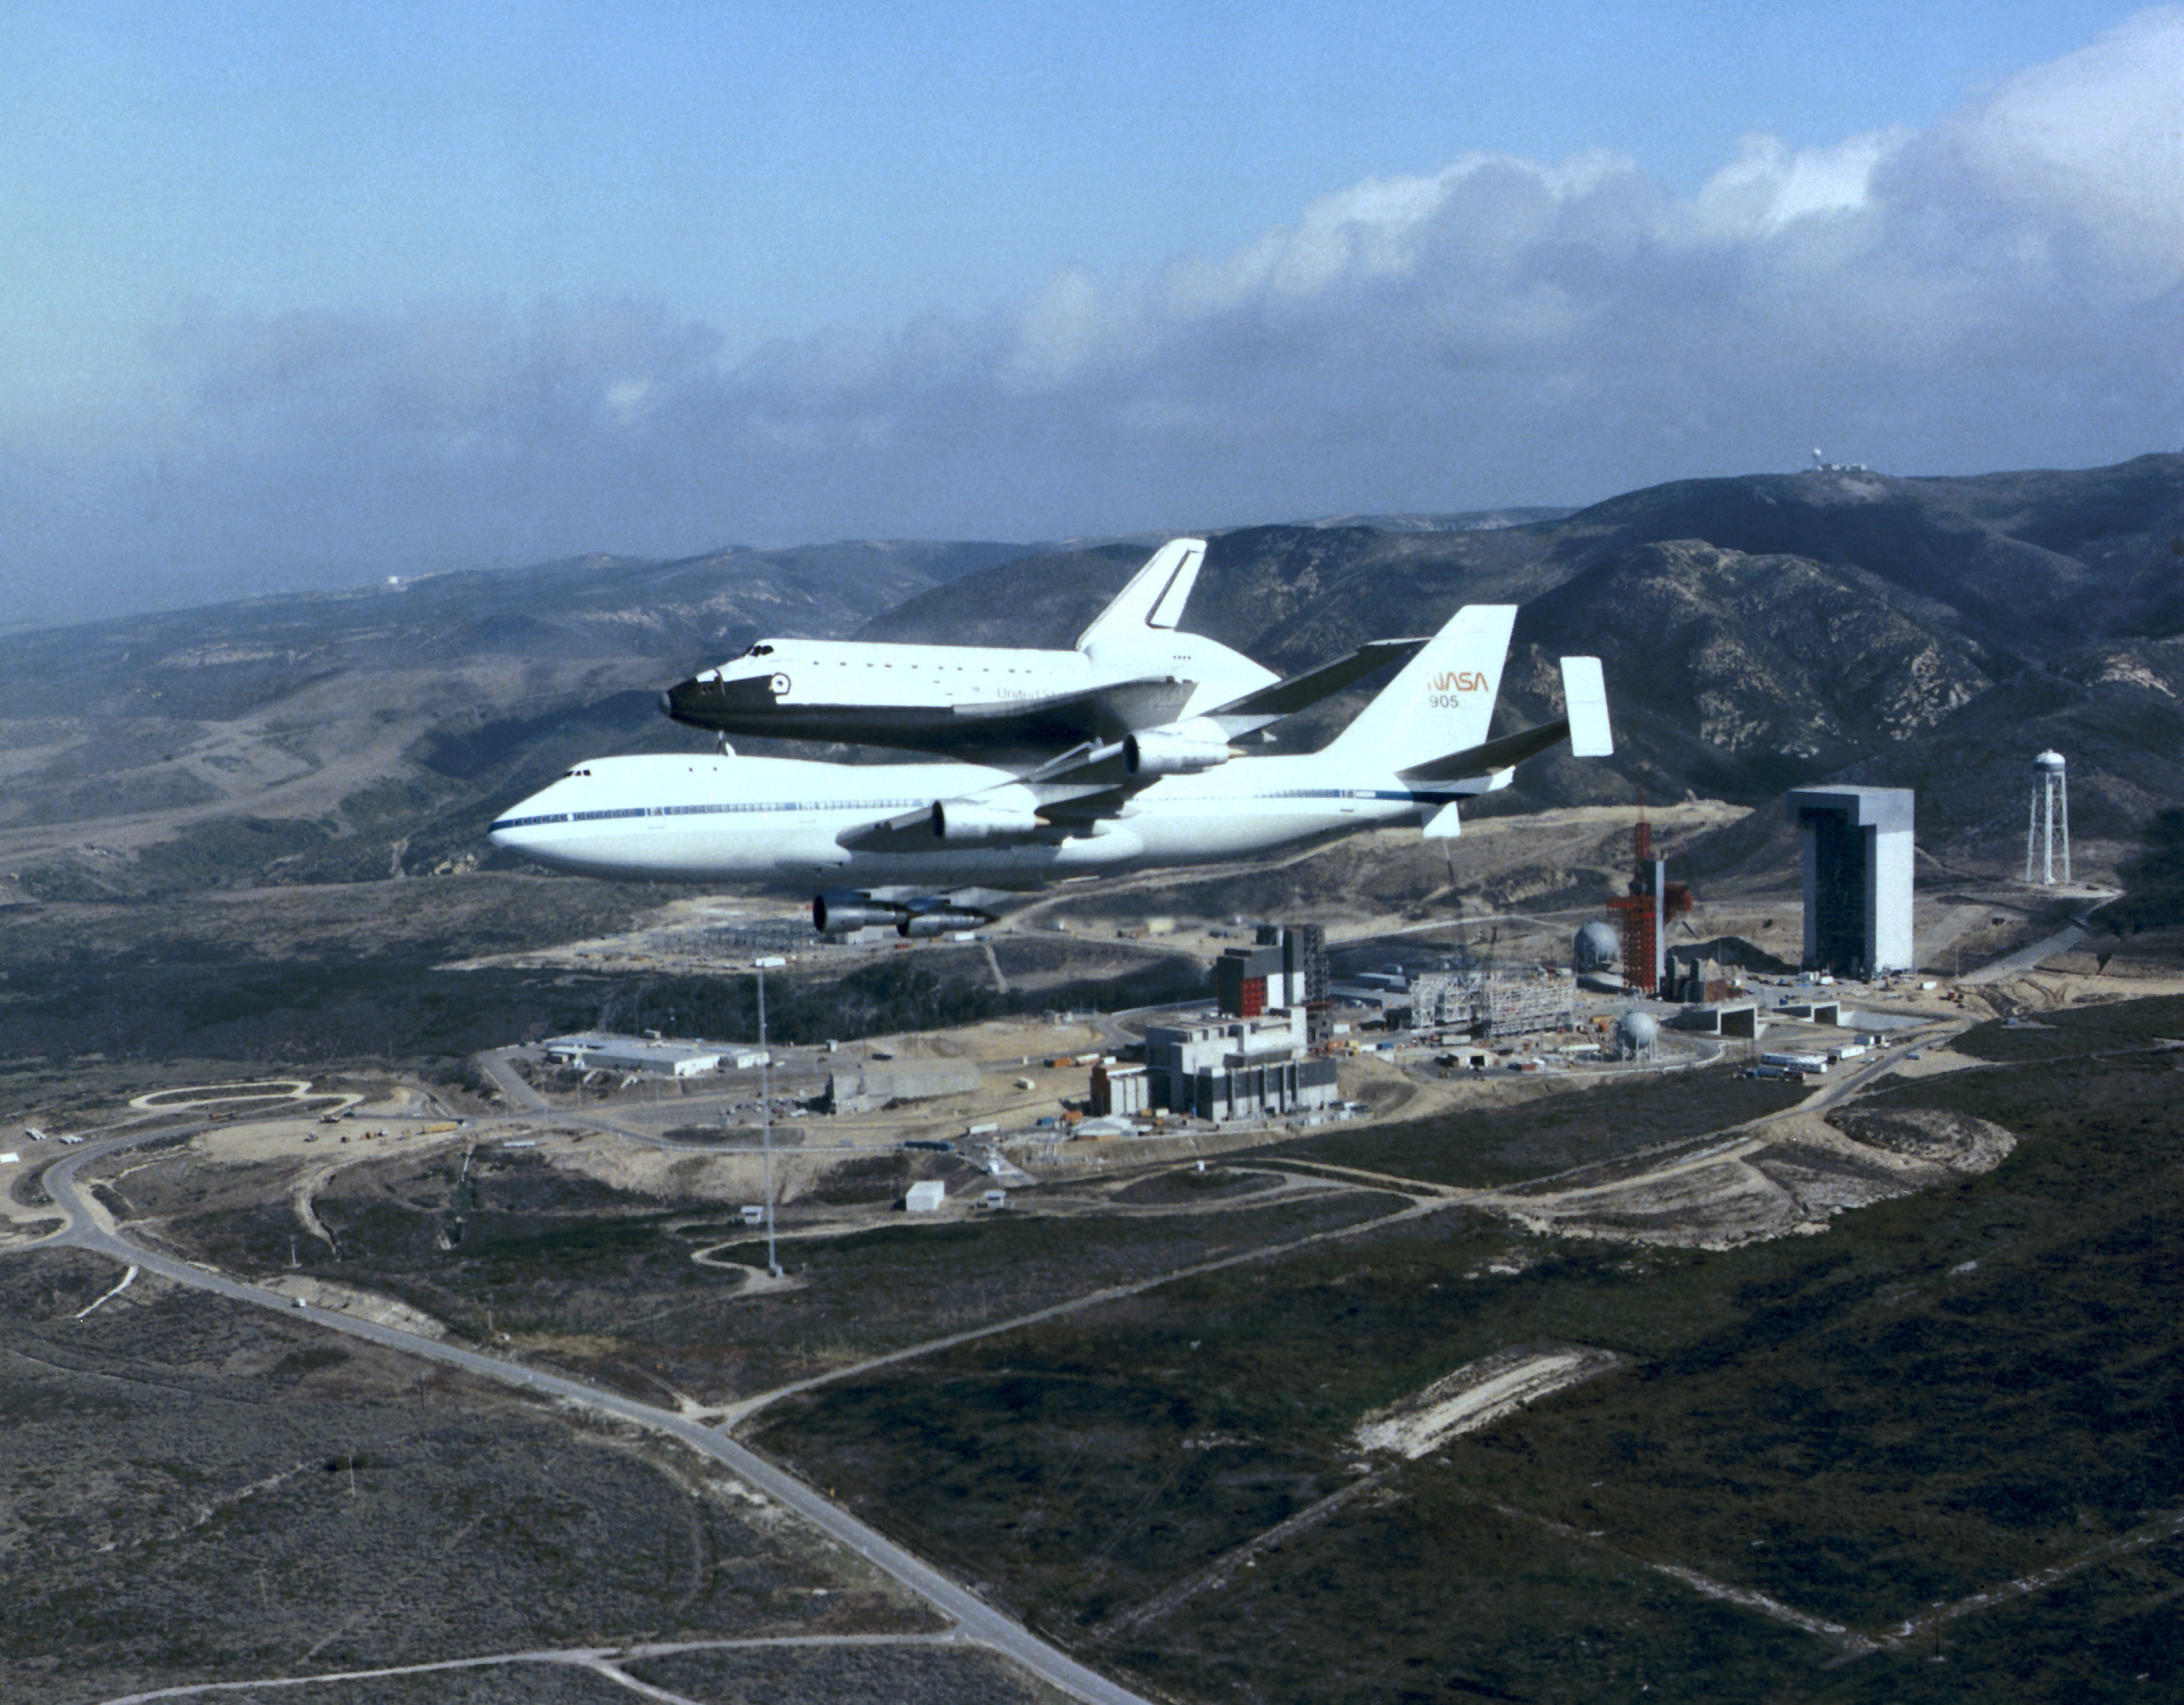 Space shuttle Discovery atop its Shuttle Carrier Aircraft (SCA) flies over Vandenberg Air Force Base